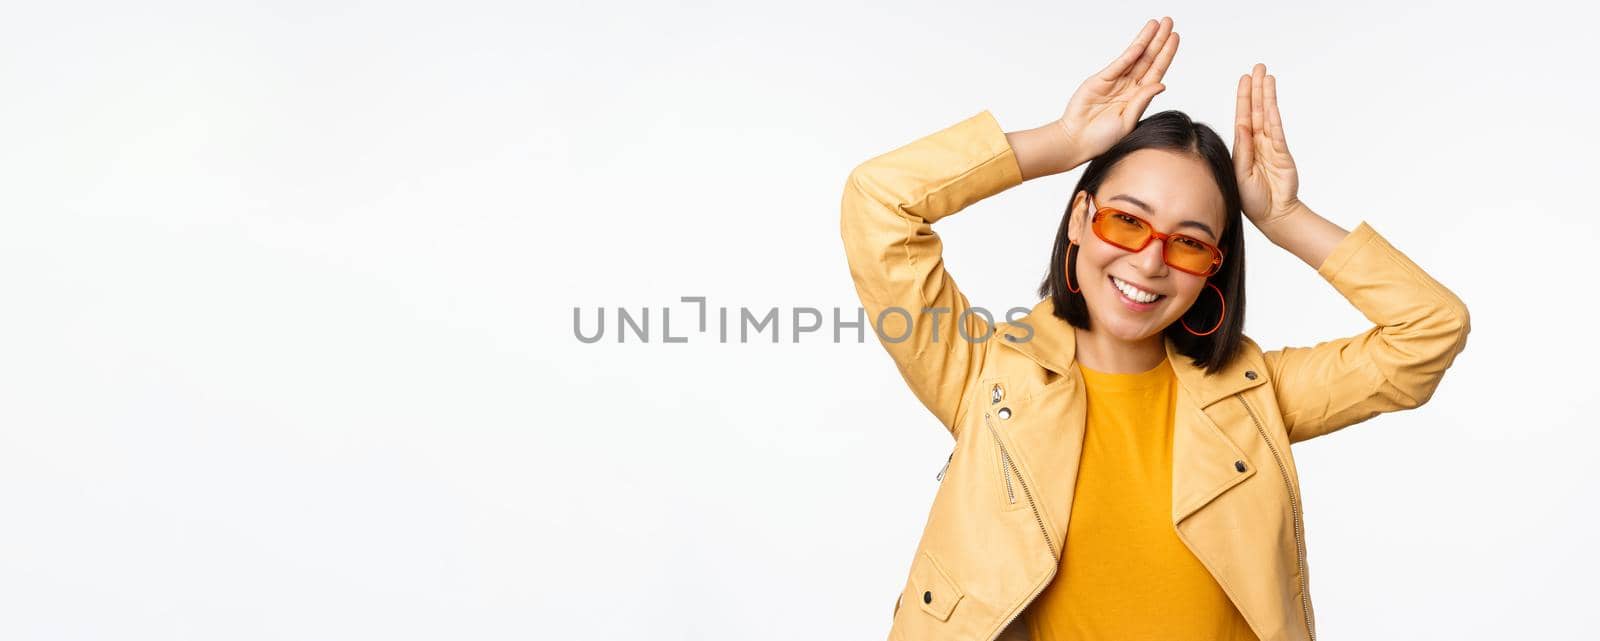 Portrait of beautiful asian girl in sunglasses, showing bunny ears hands gesture and smiling, standing happy over white background.